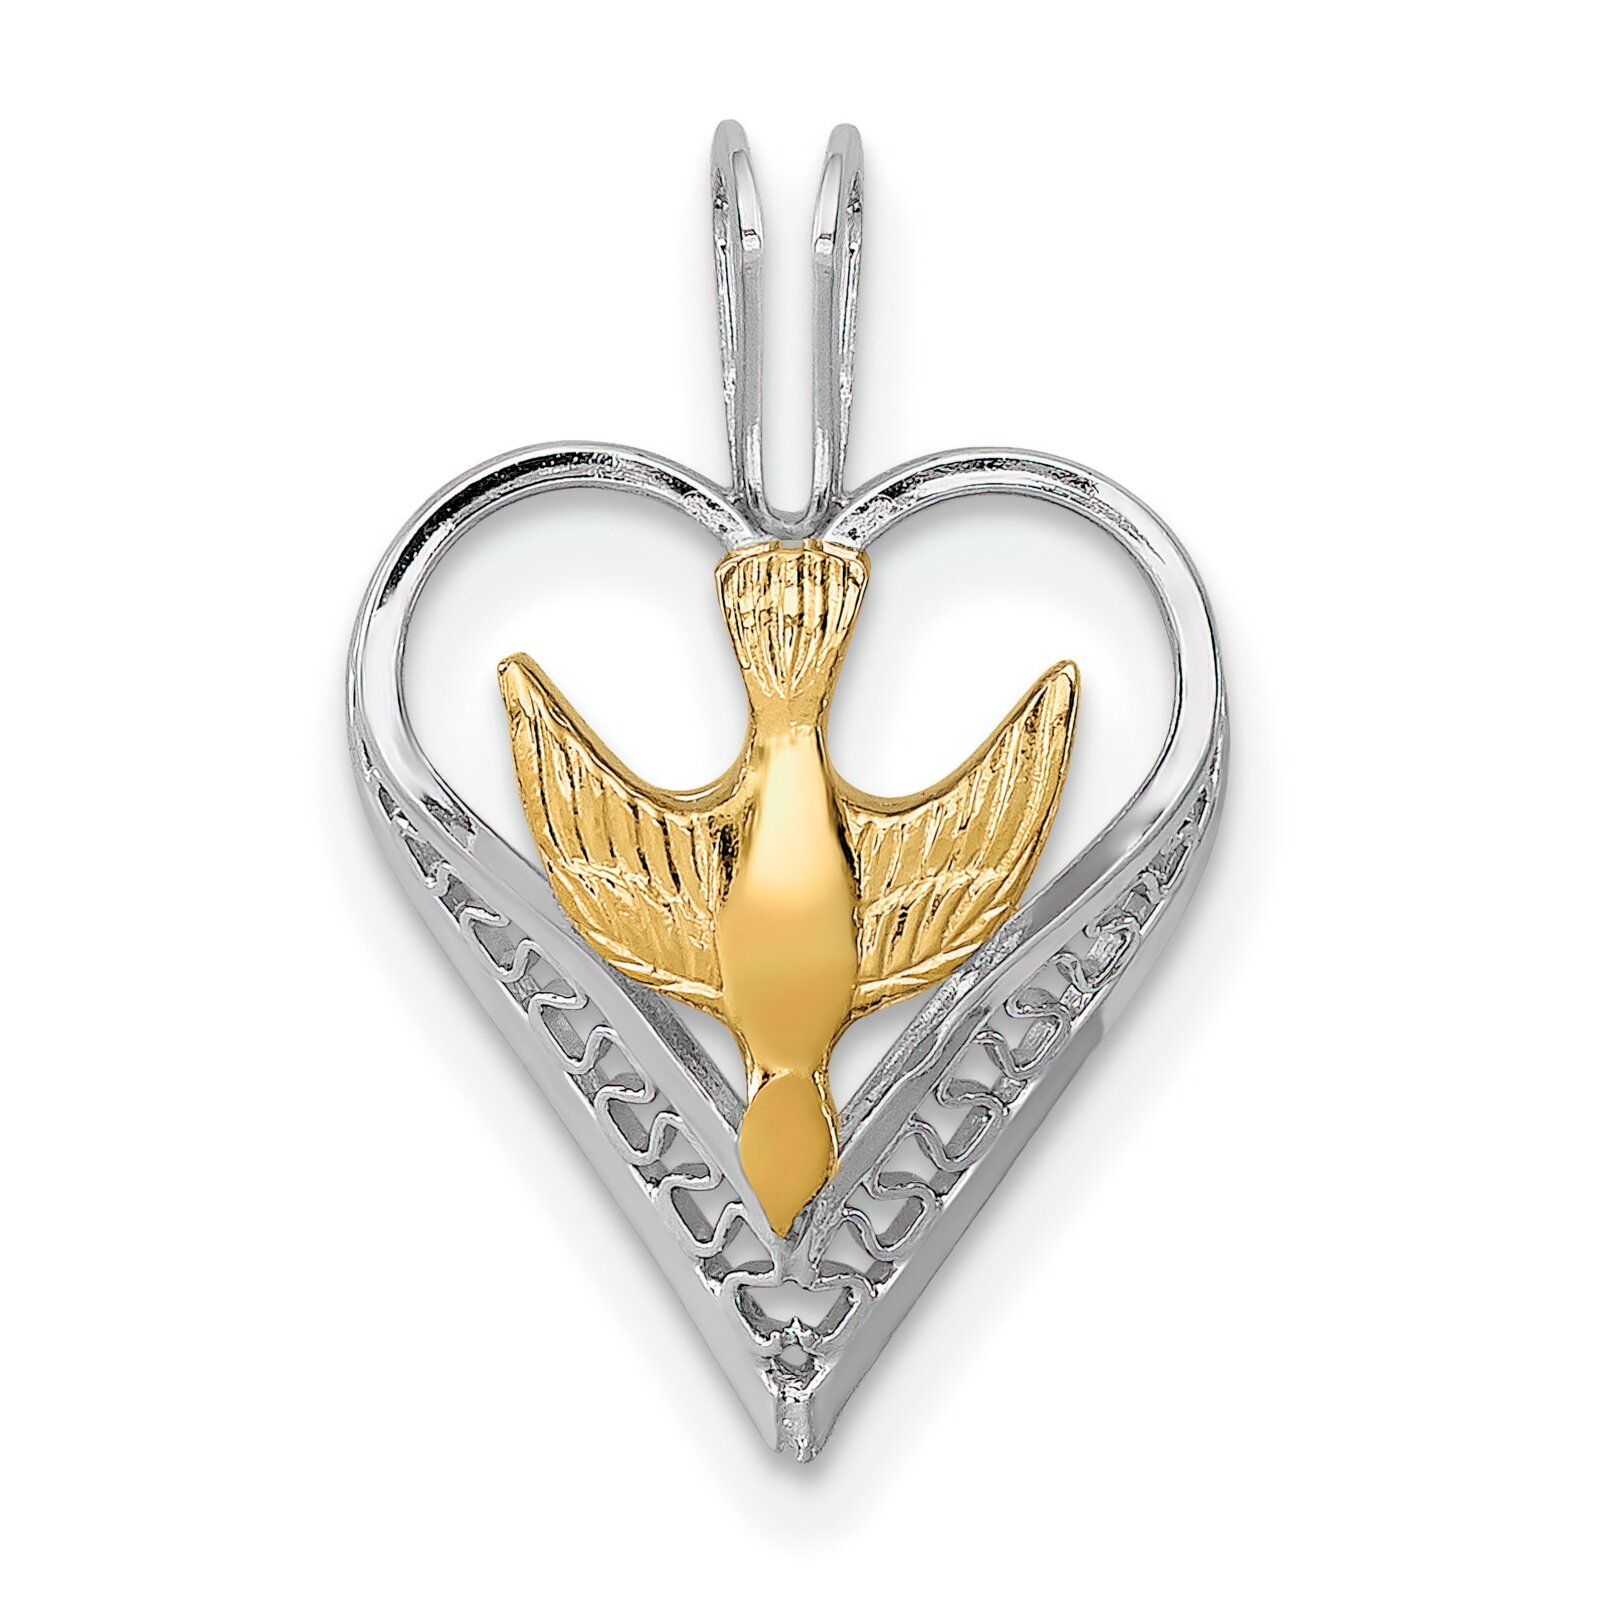 Findingking Sterling Silver Gold Plated Dove Heart Charm